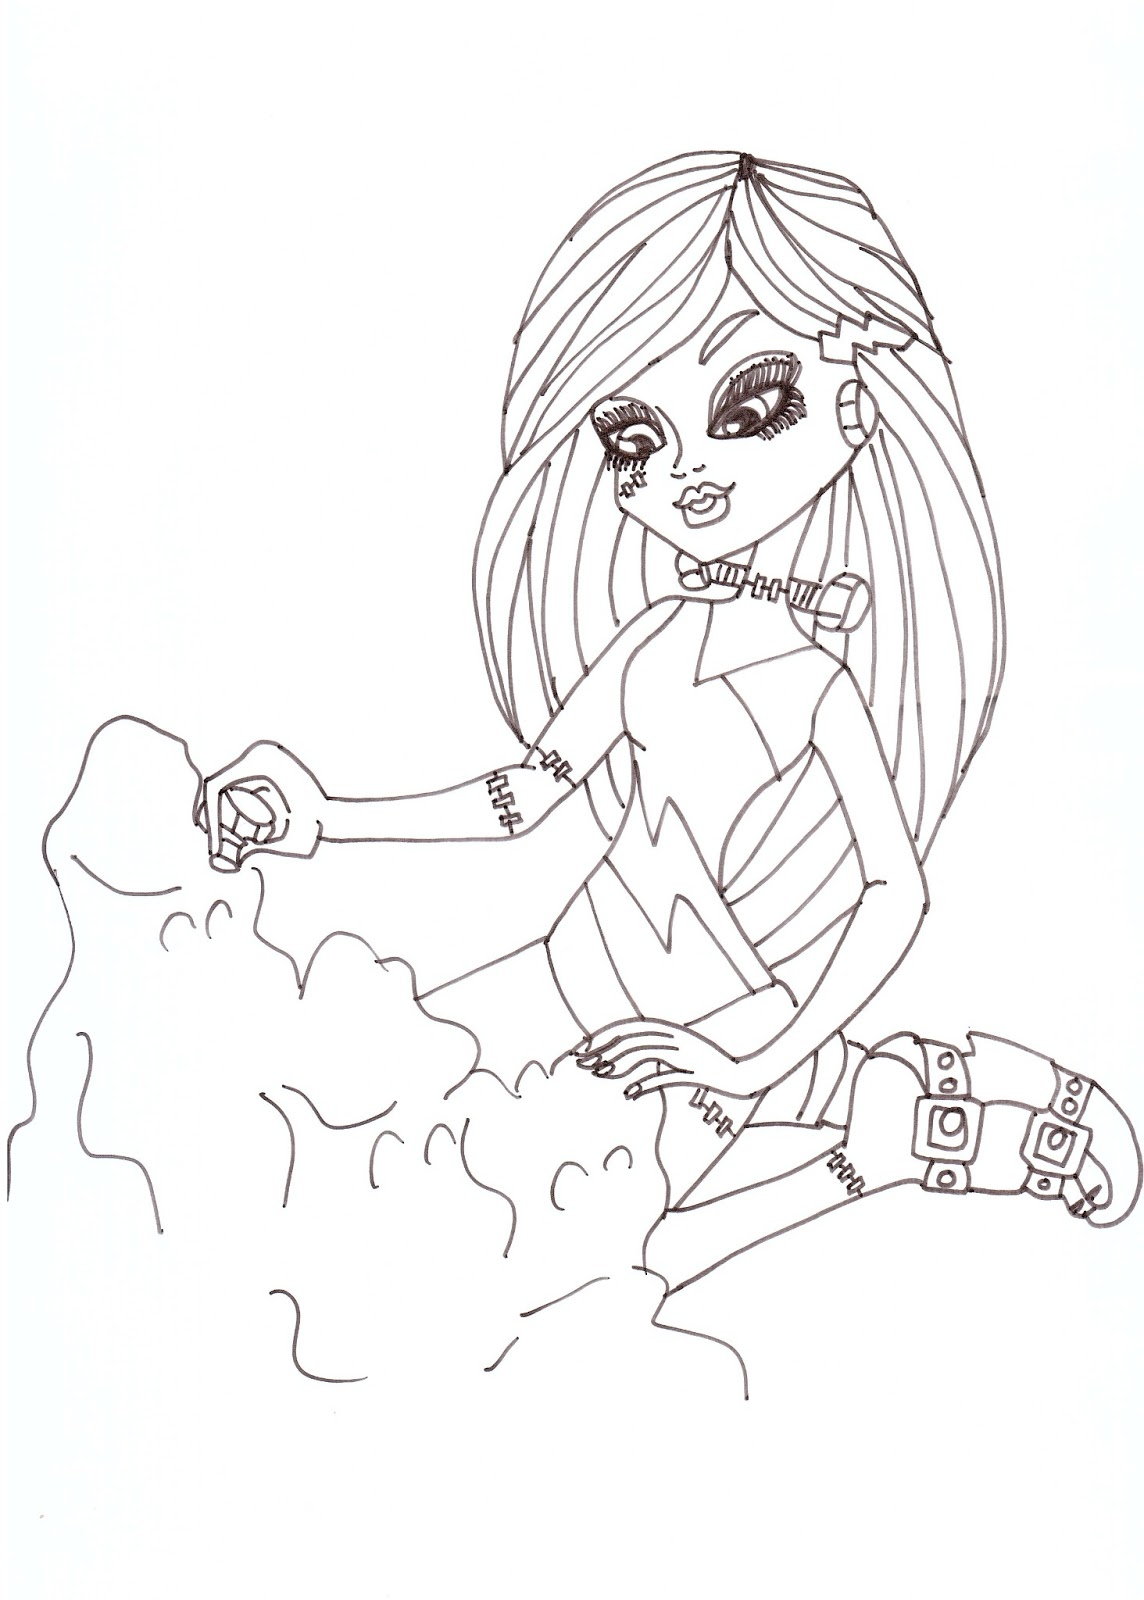 Download Free Printable Monster High Coloring Pages: Frankie Stein Gloom Beach Coloring Sheet